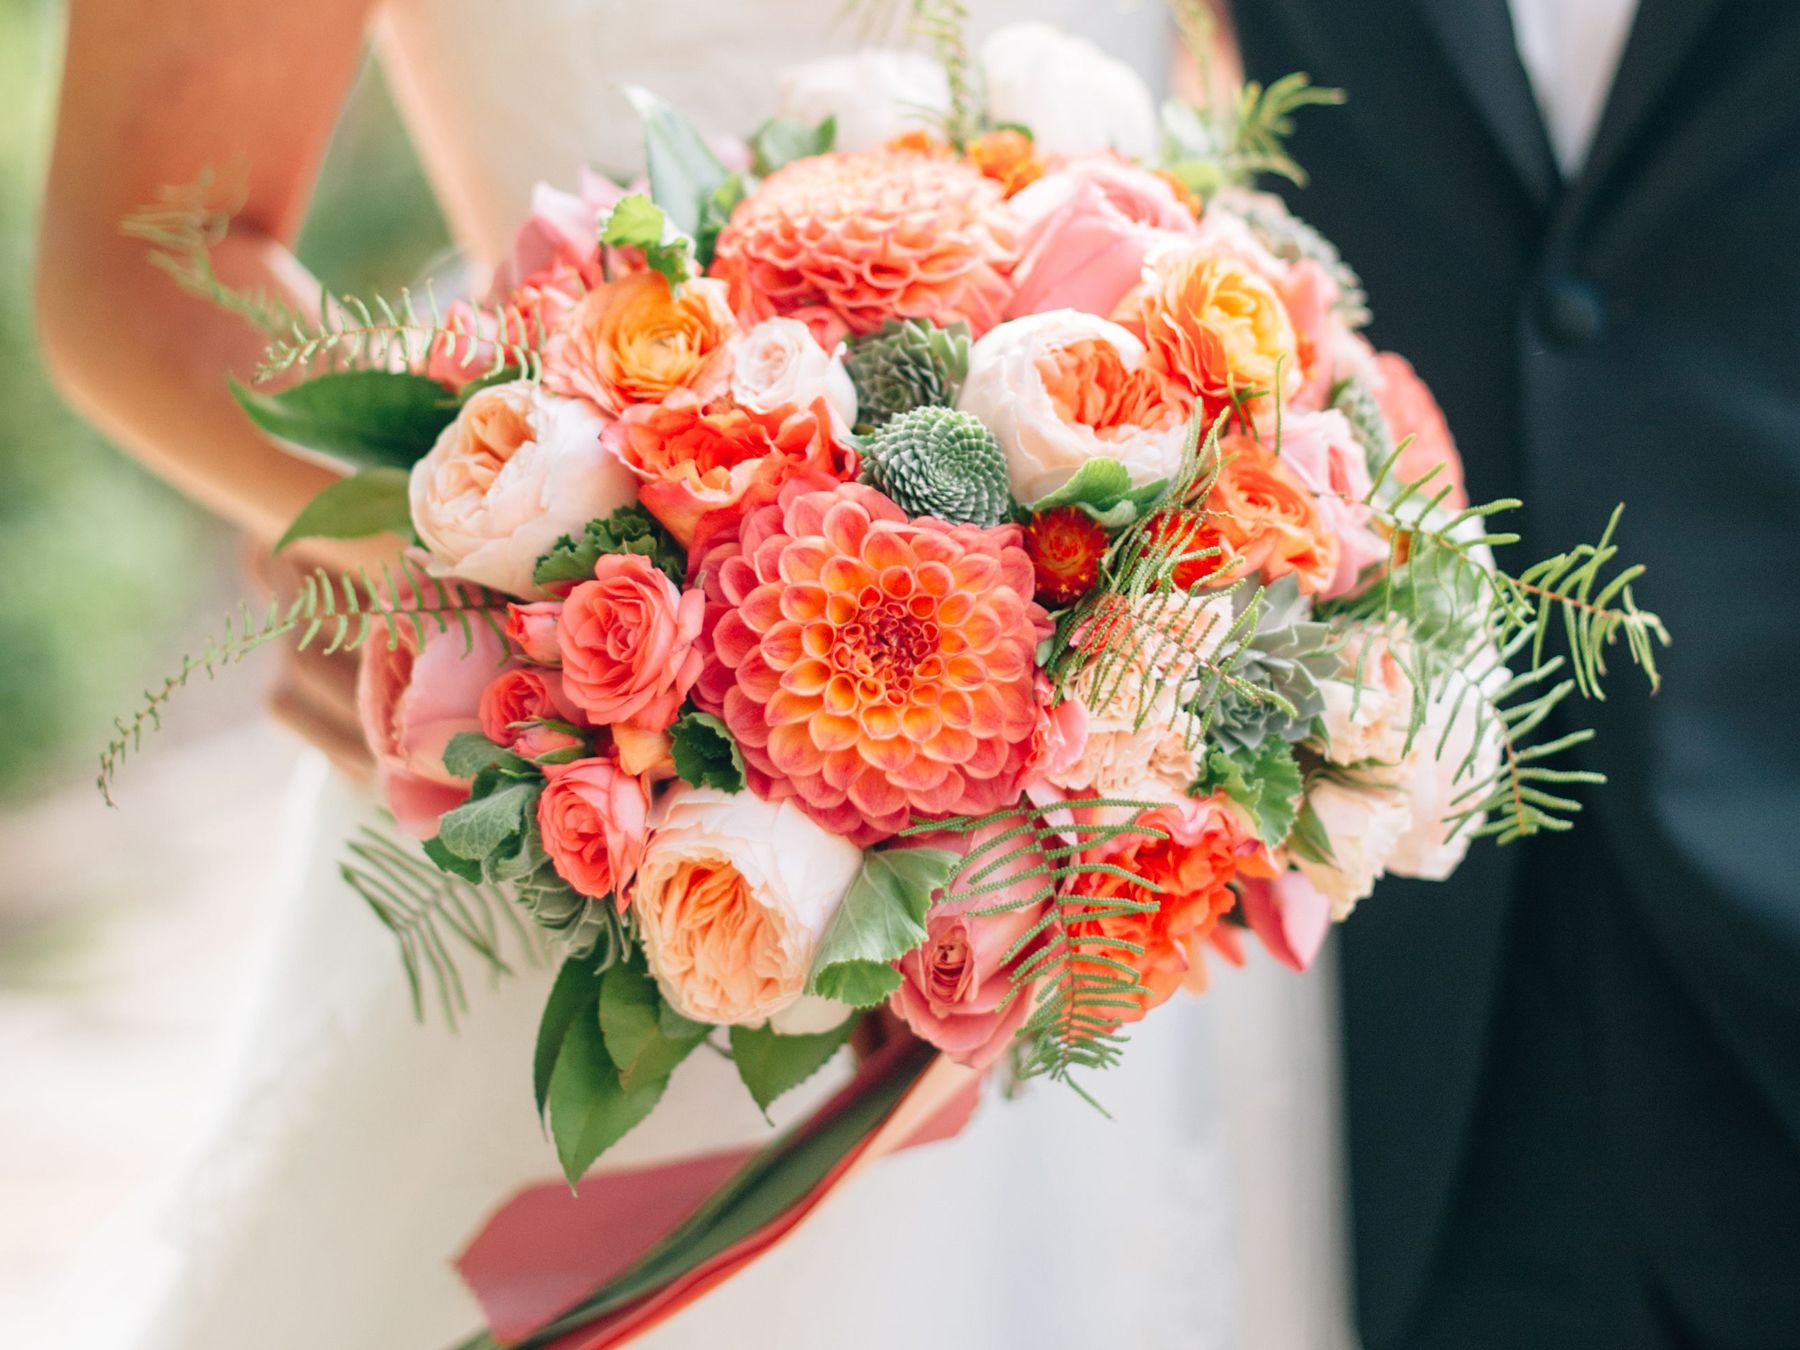 Wedding Flower Guide With Season, Color and Price Details